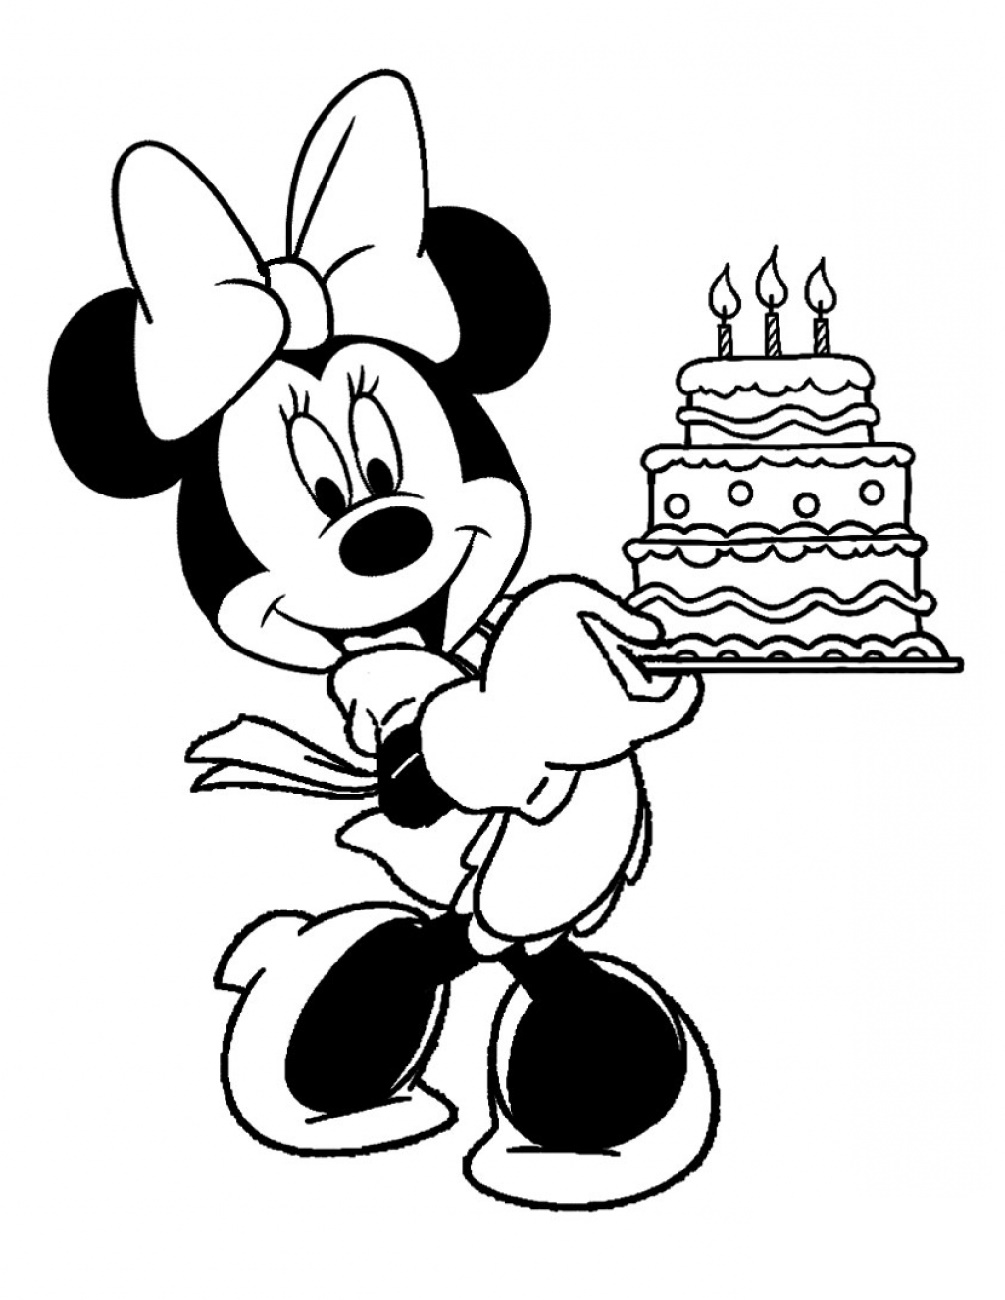 Mickey-Mouse-Birthday-Coloring-Pages-Minnie-Mouse